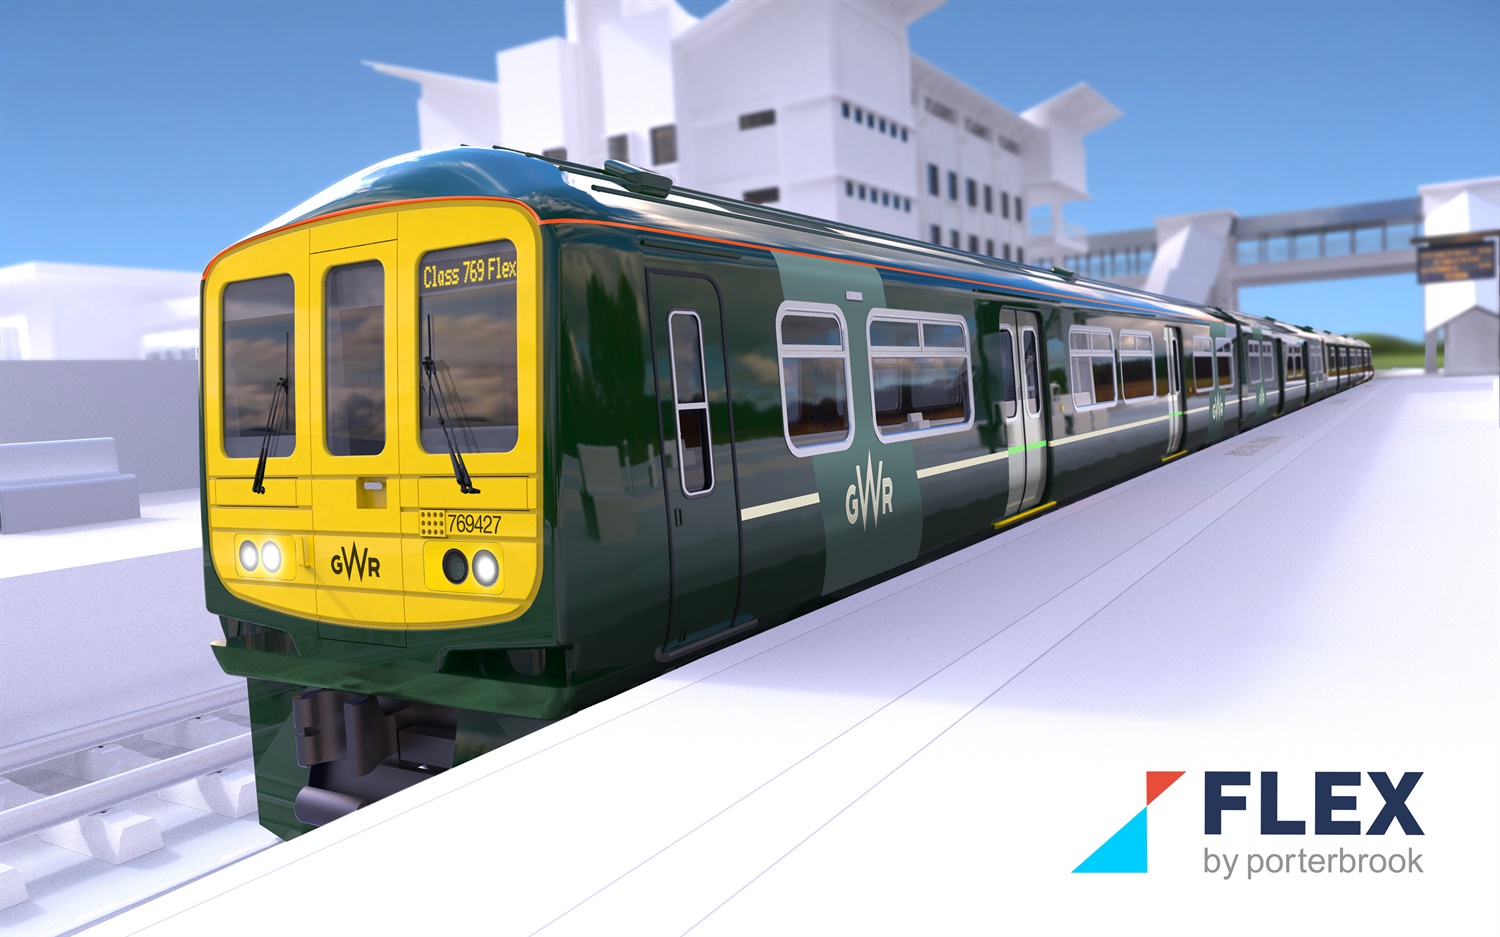 GWR to roll out 19 ‘tri-mode’ trains by 2019 under new deal